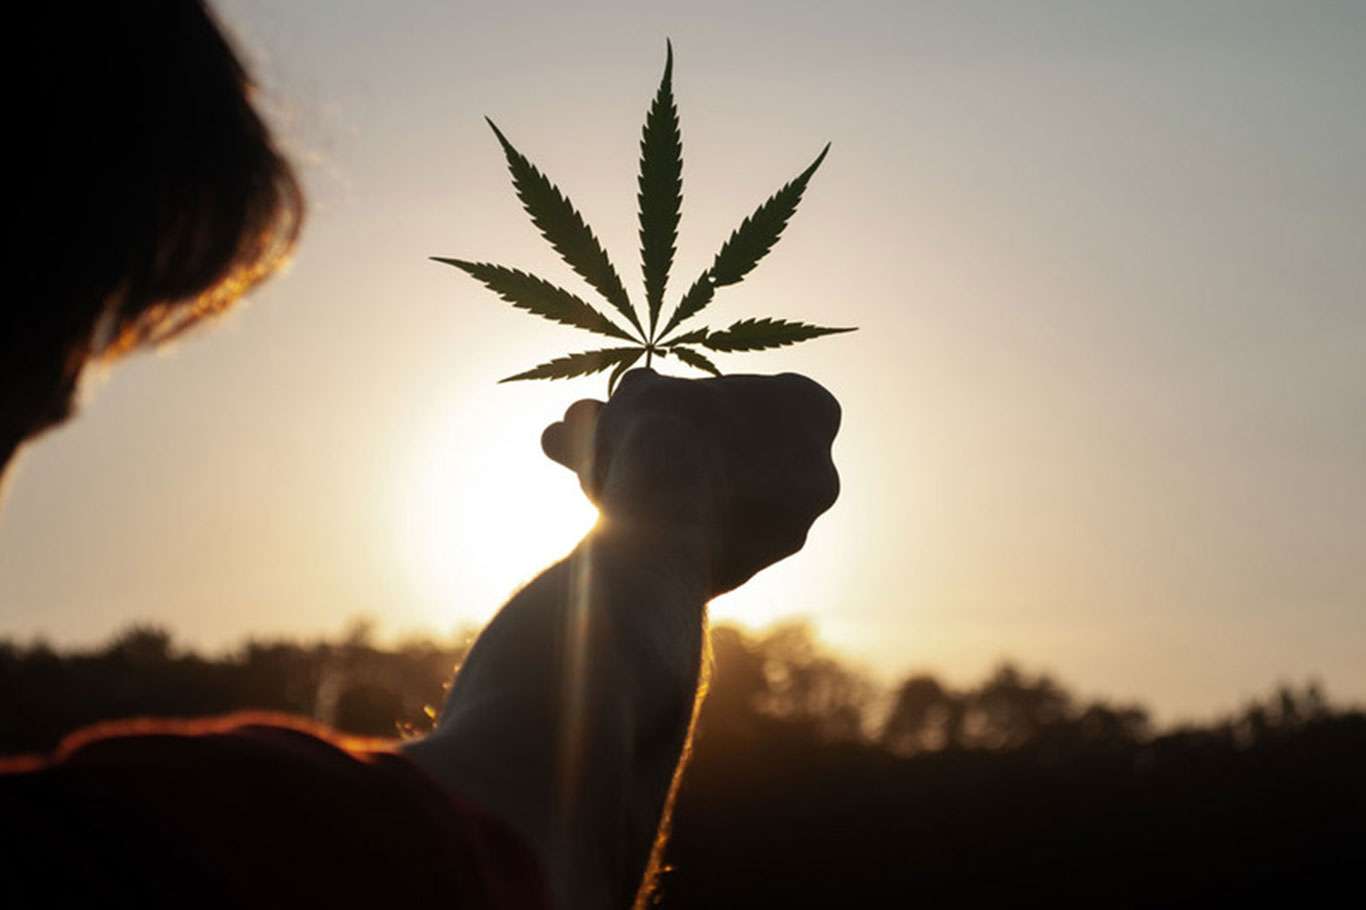 UN commission reclassifies cannabis, no longer considered risky narcotic